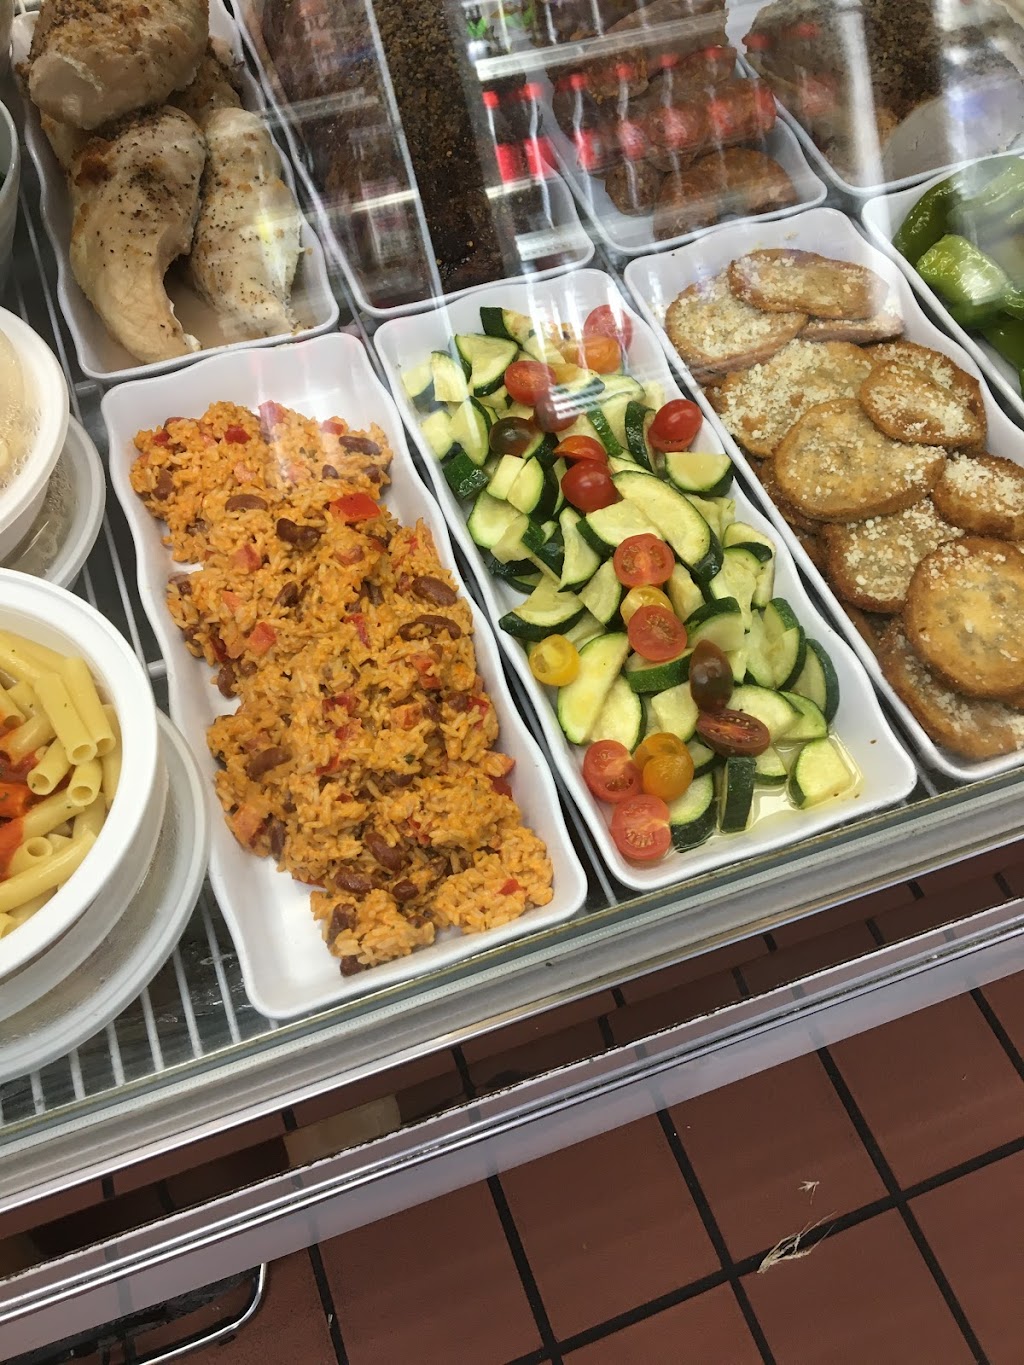 BOBBY CABOOSE DELI GRILL | 100 Plymouth St, Fairfield, NJ 07004 | Phone: (973) 227-5550